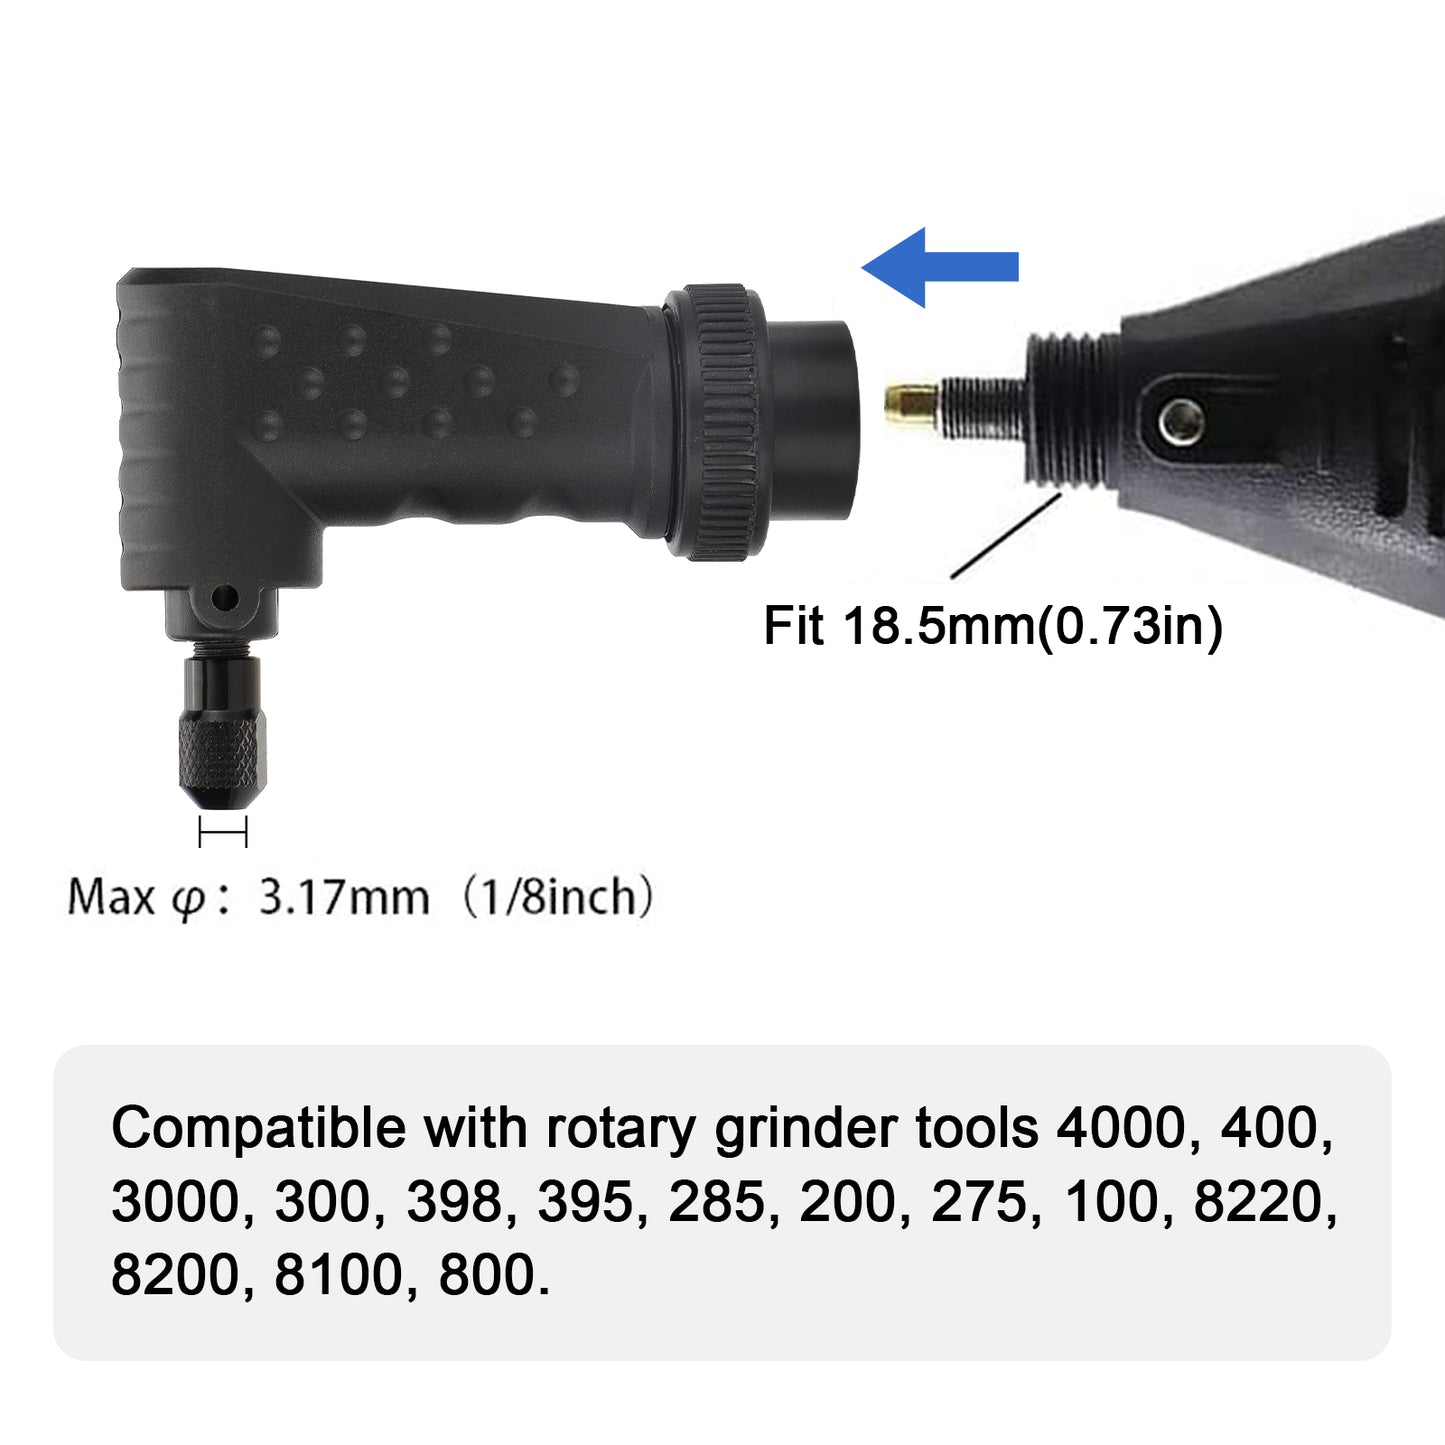 Right Angle Converter Rotary Tool Adapter Attachment for Dremel Electric Grinder - Compatible with 4000, 3000, 8200, 275 Models